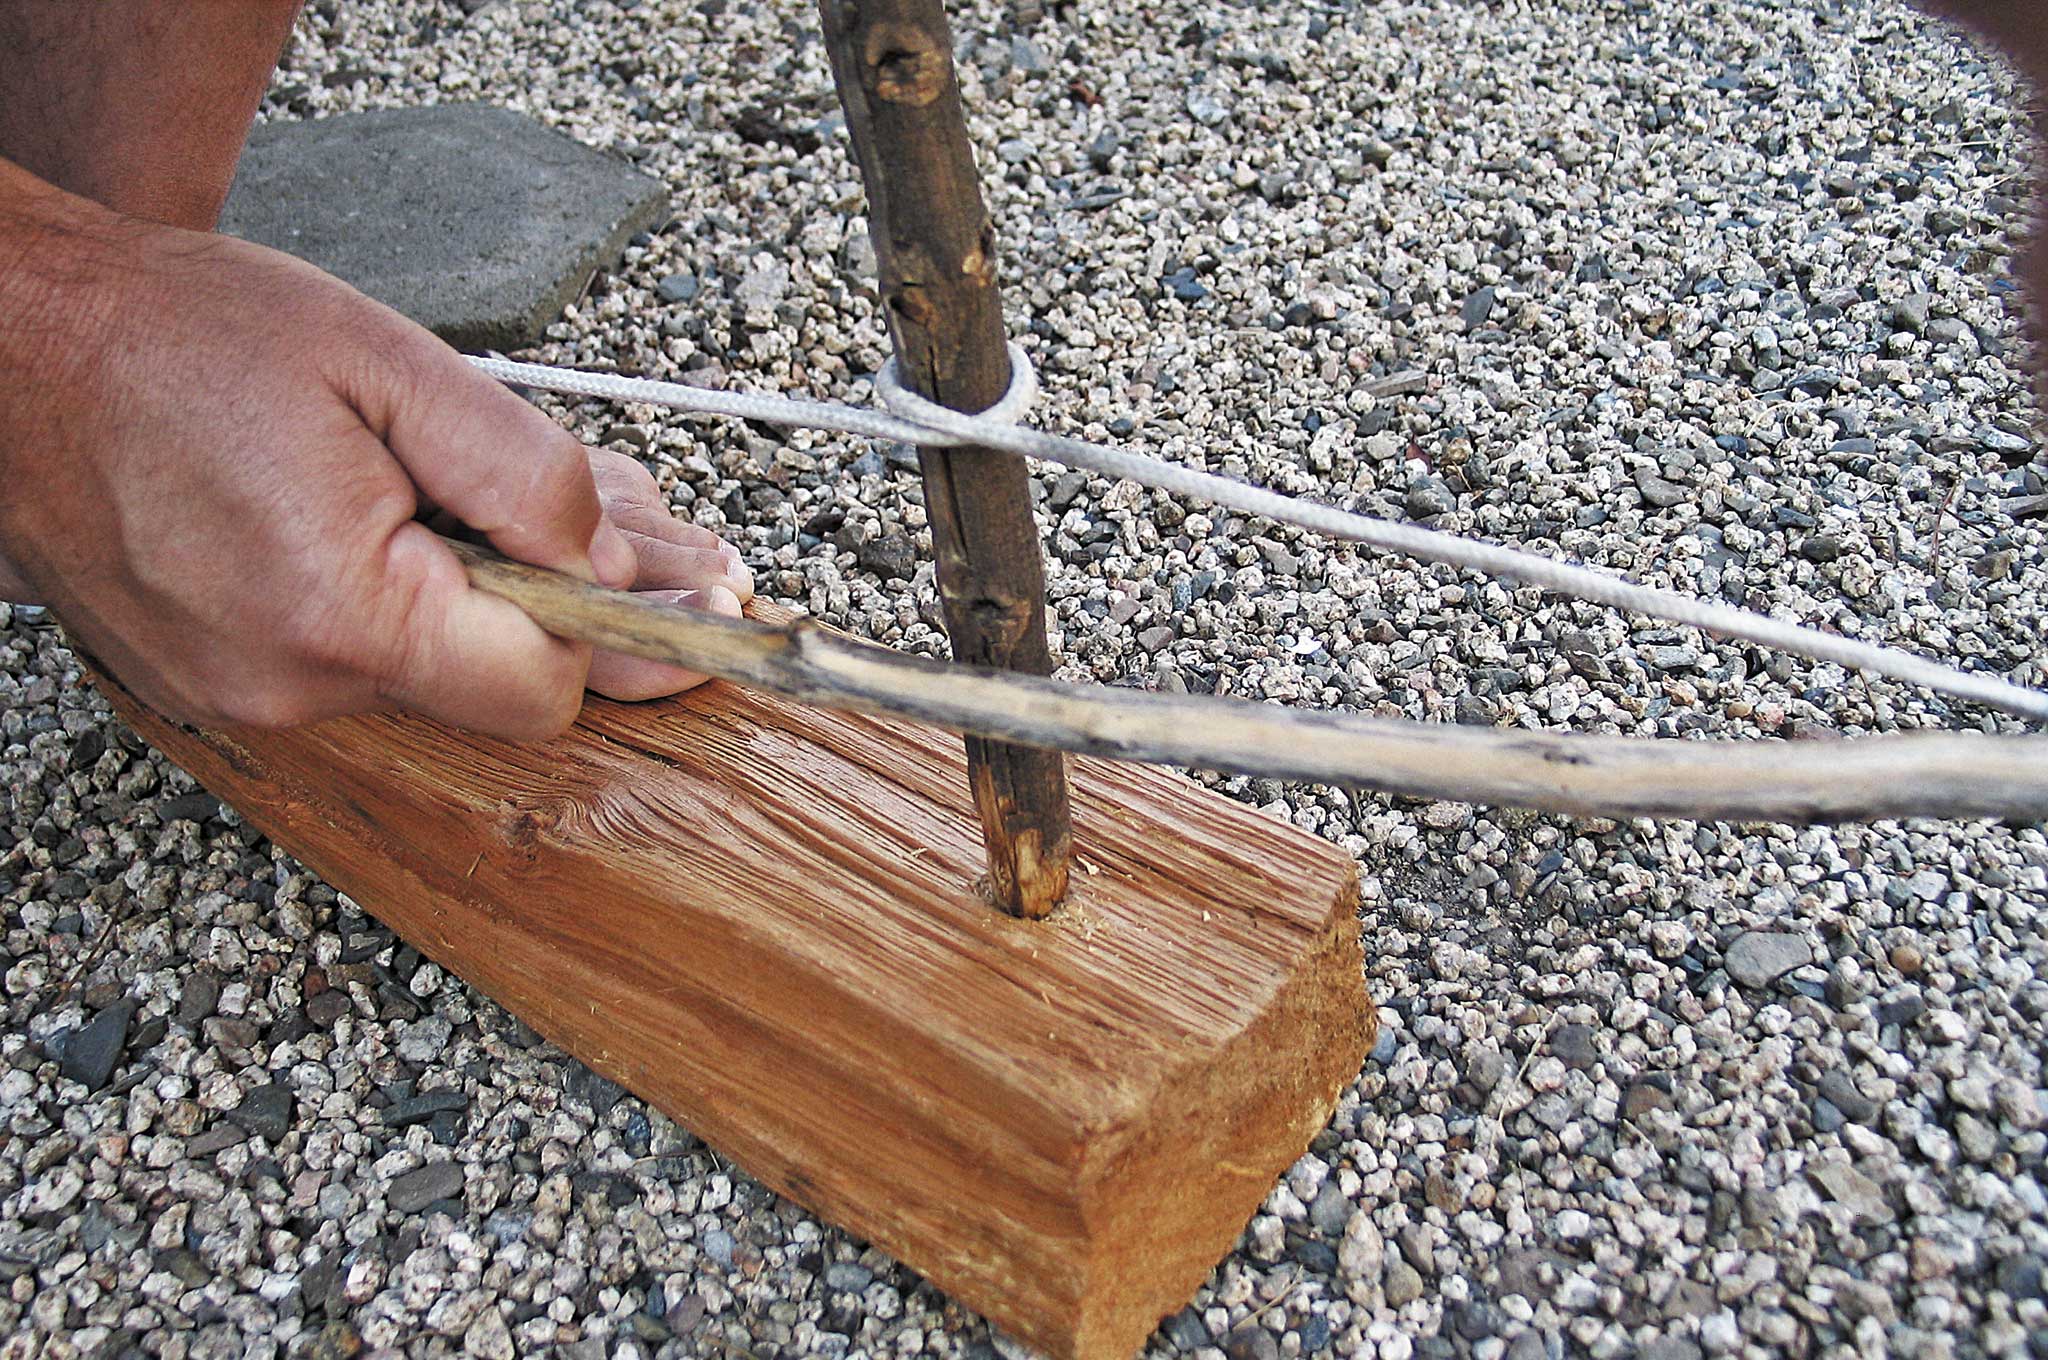 fire-starting-methods-bow-drill-hand-drill-method